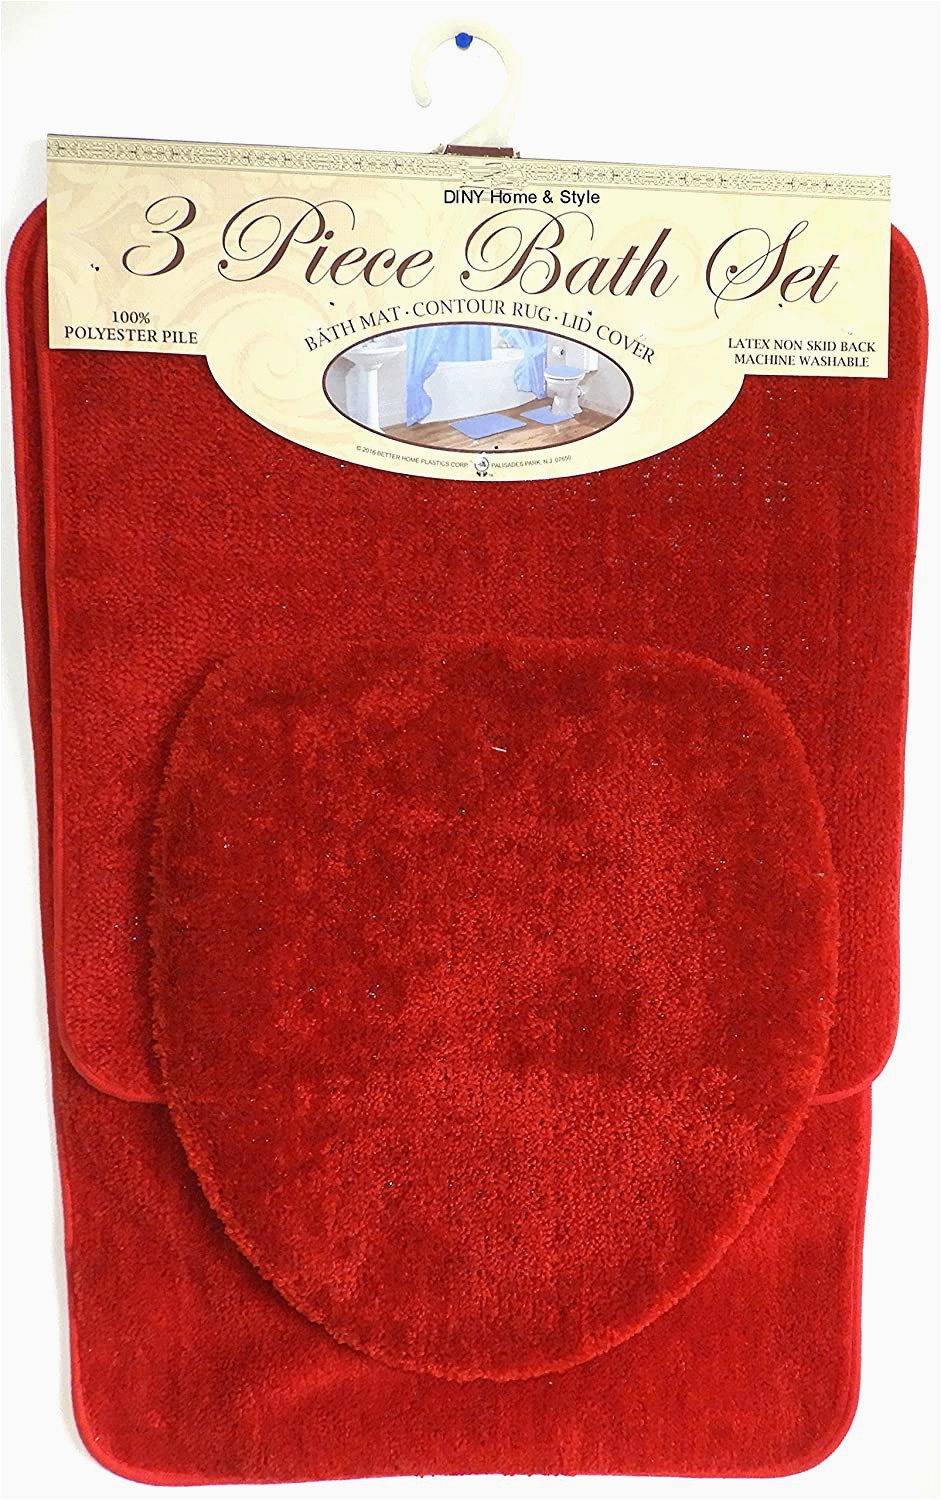 Cheap Red Bathroom Rugs Buy Diny Home & Style 3 Piece Bath Rug Set Brick Red